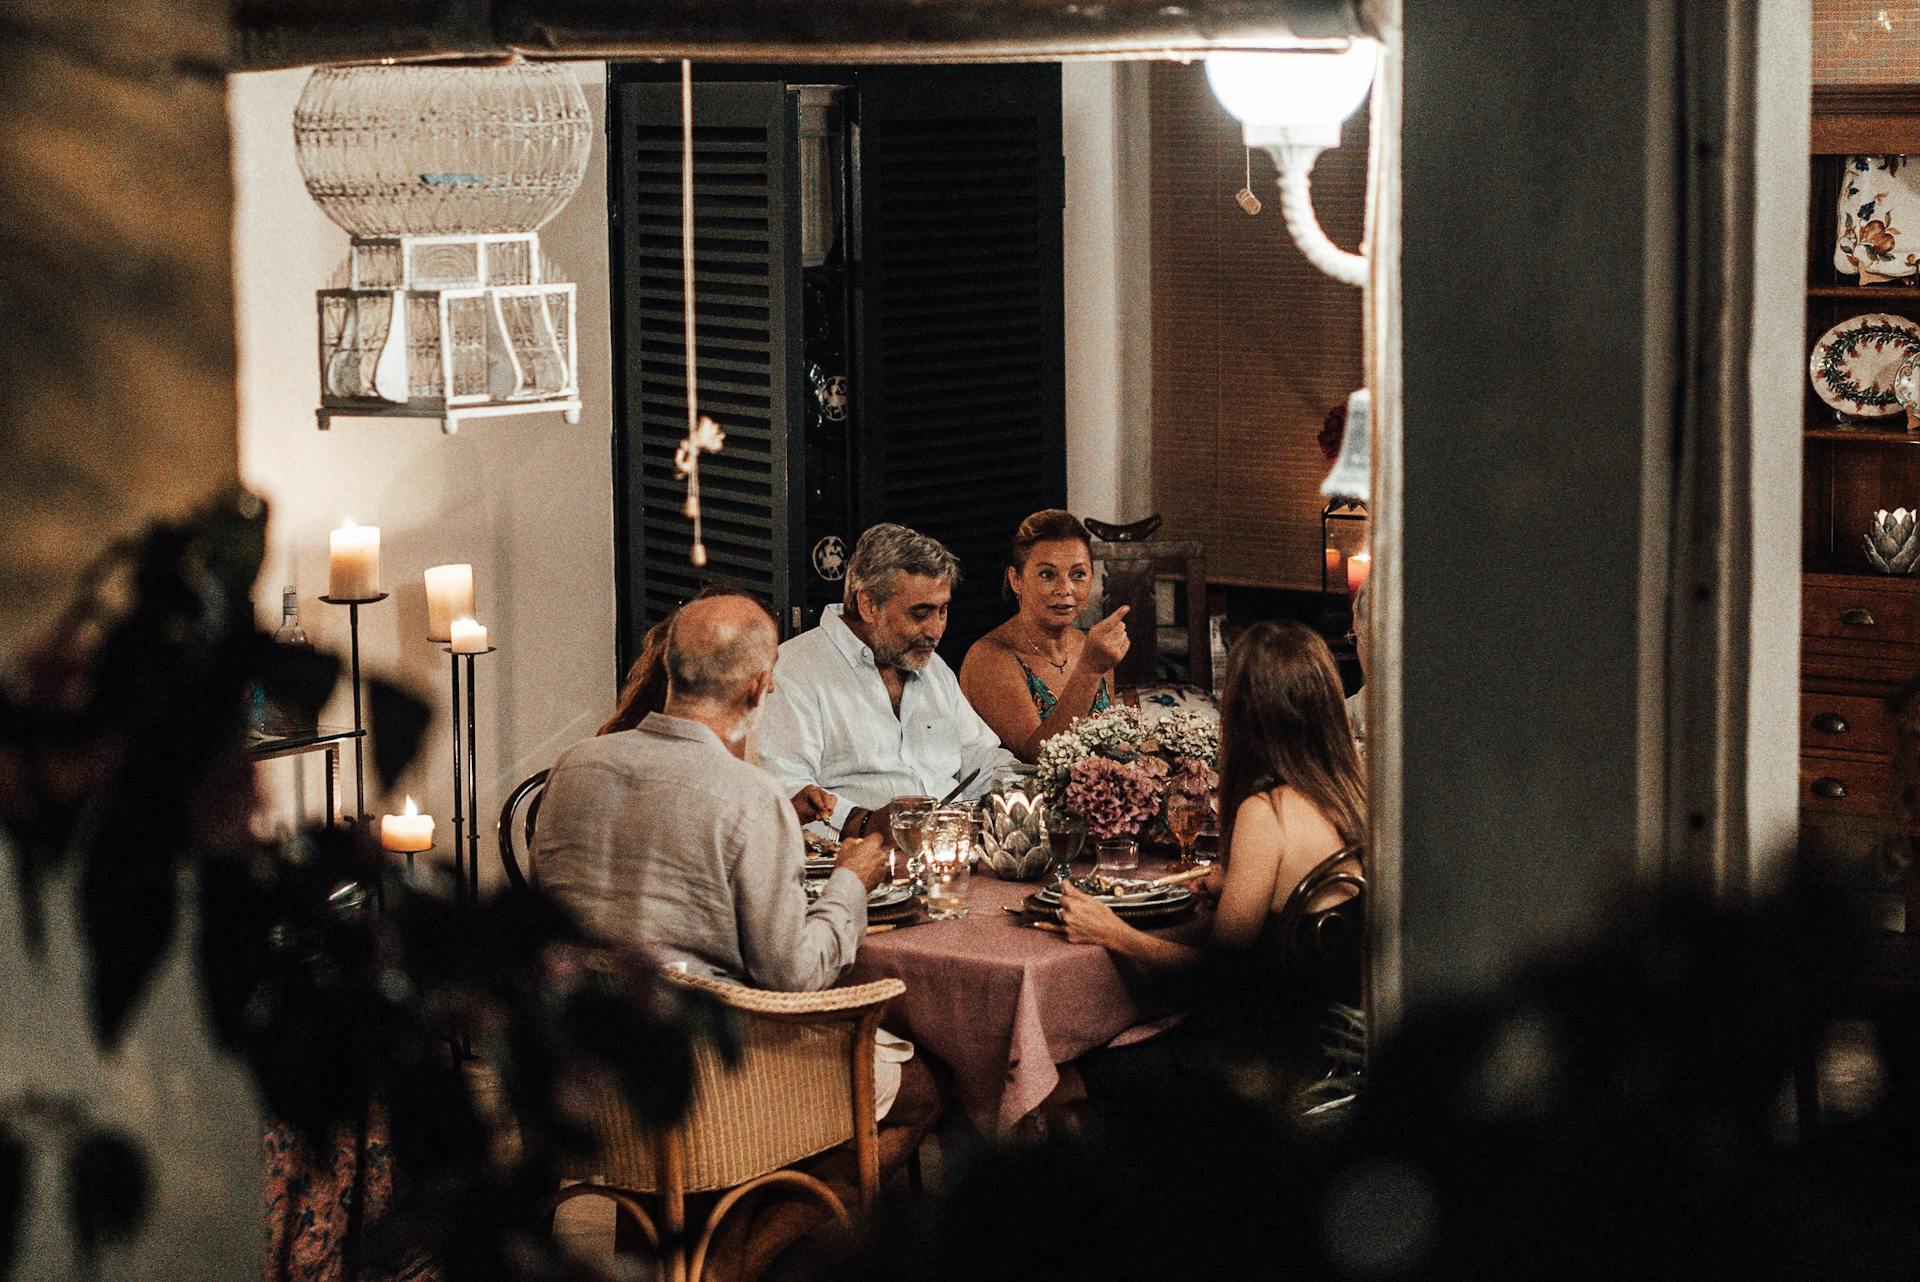 A group of people sitting at the dining table together | Source: Pexels